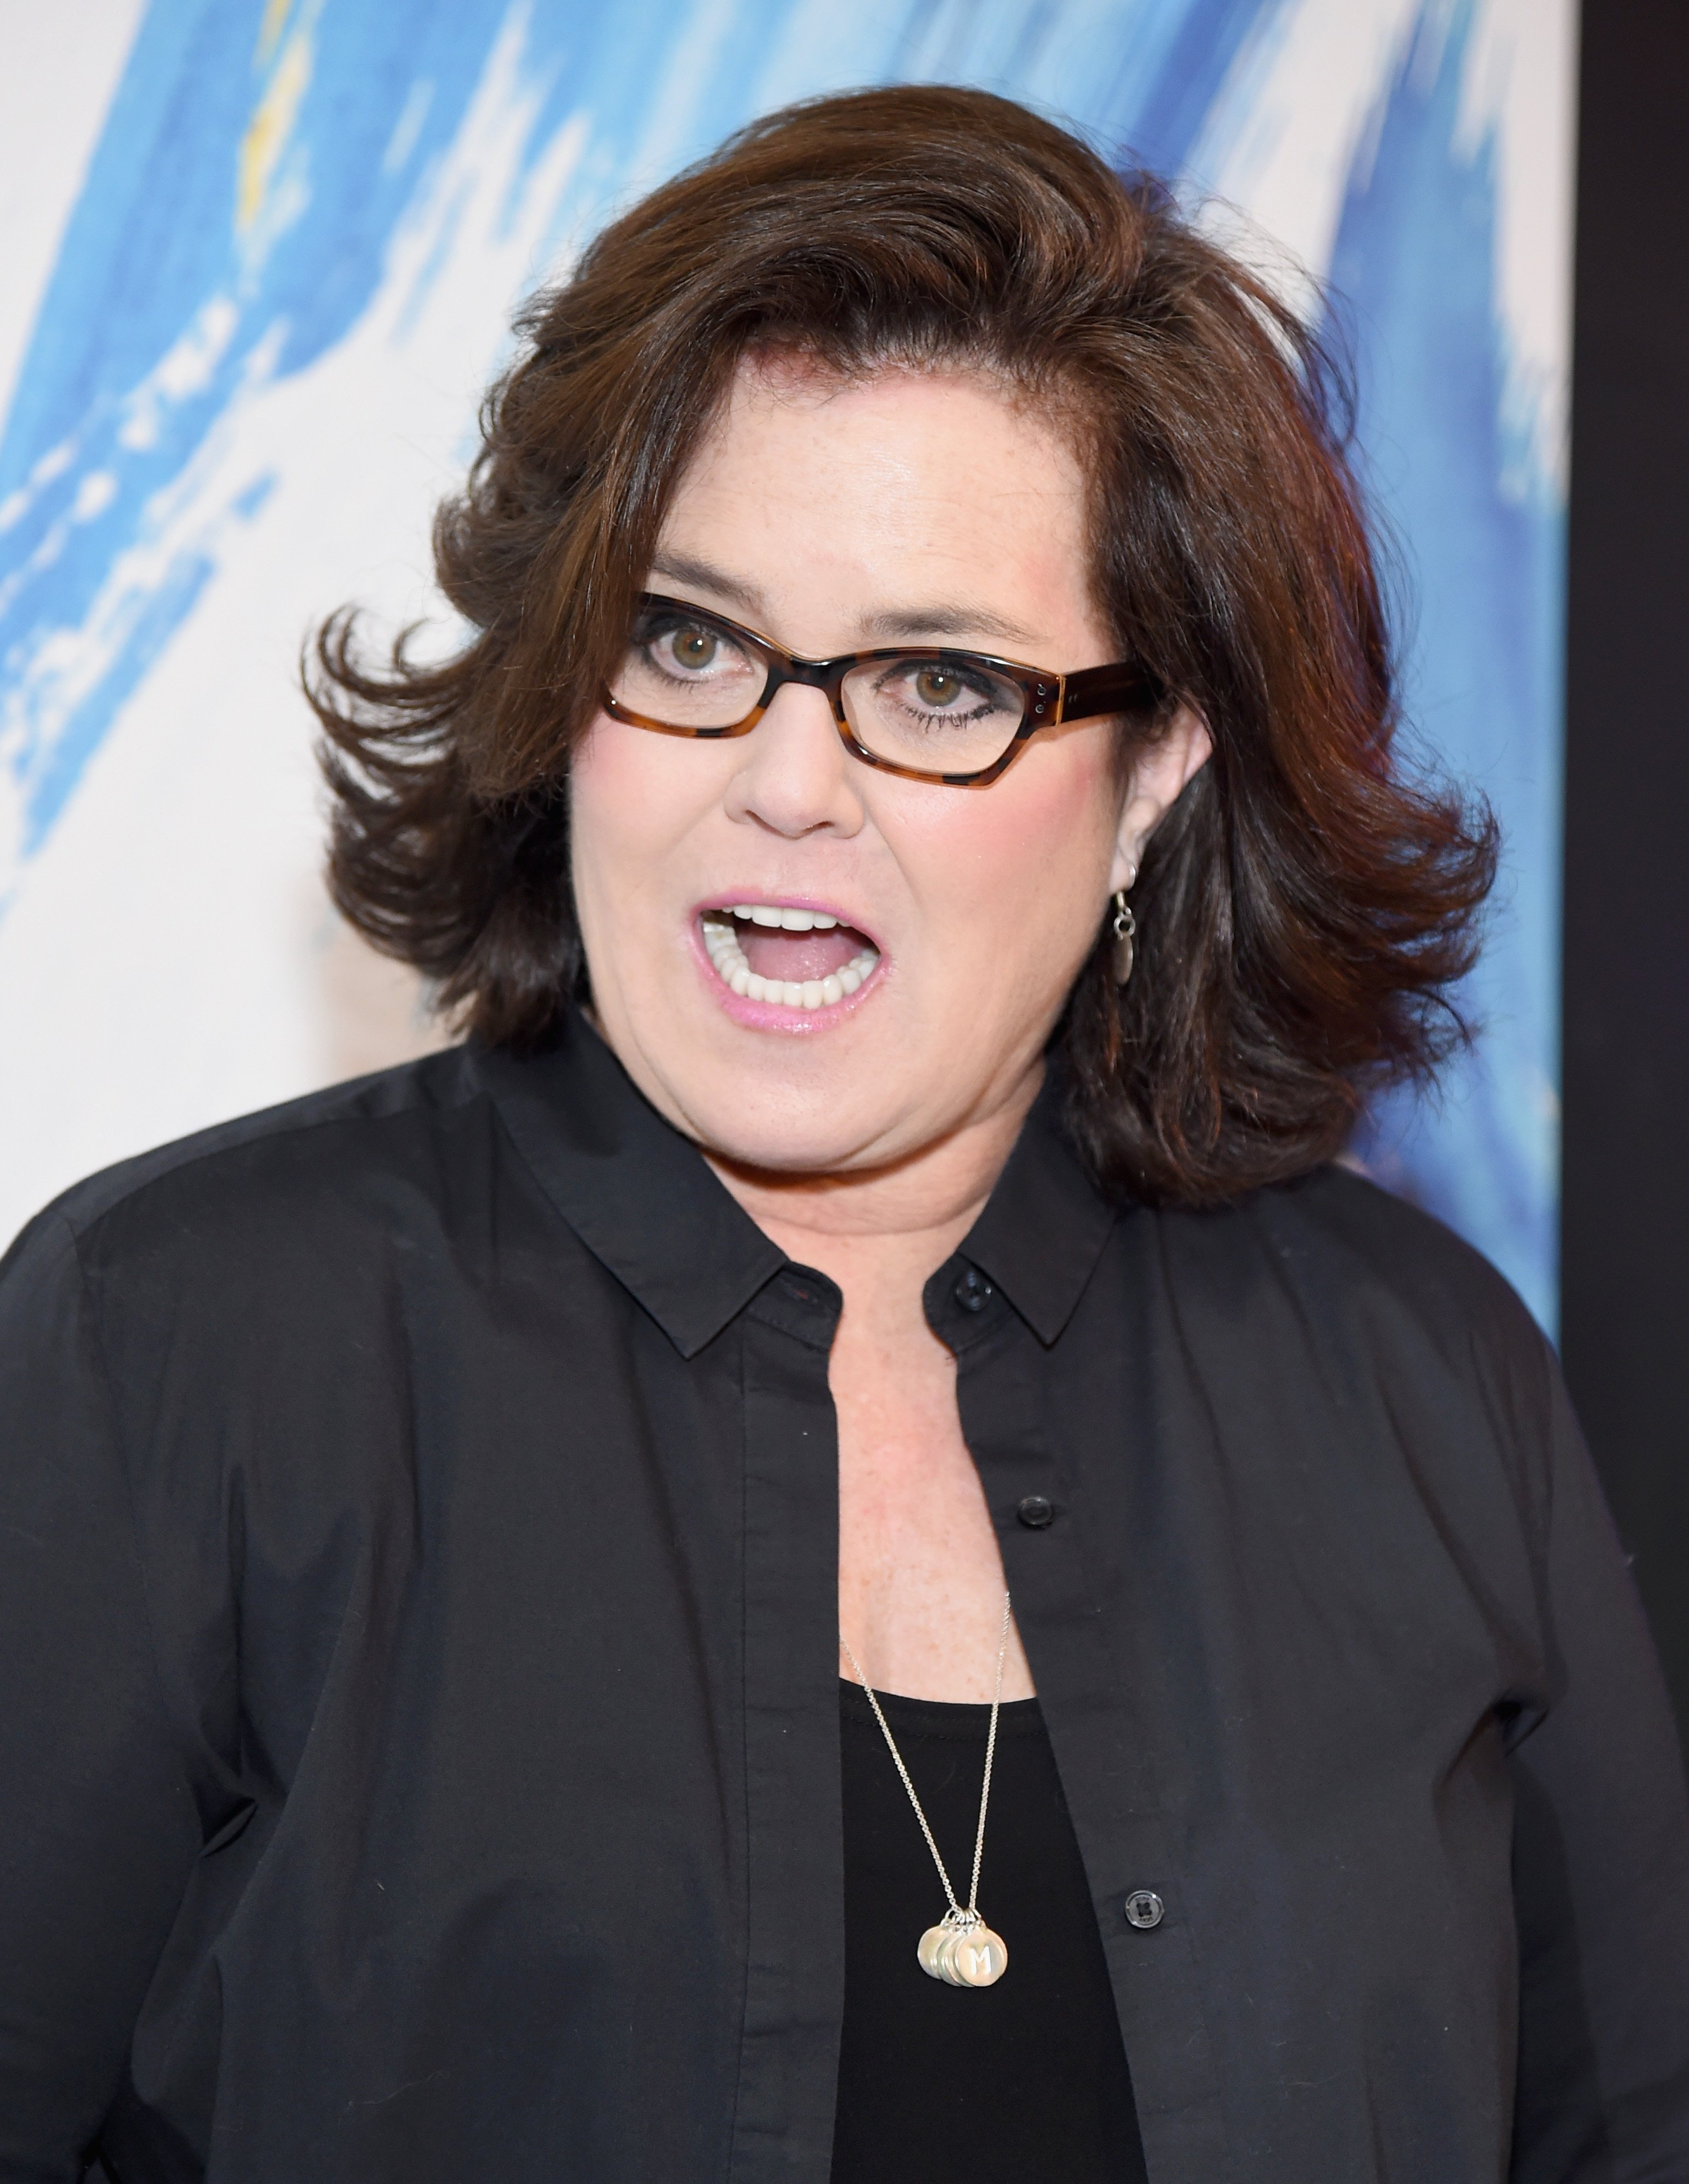 Rosie O'Donnell, author, actress, and former talk show host | Photo: Getty Images